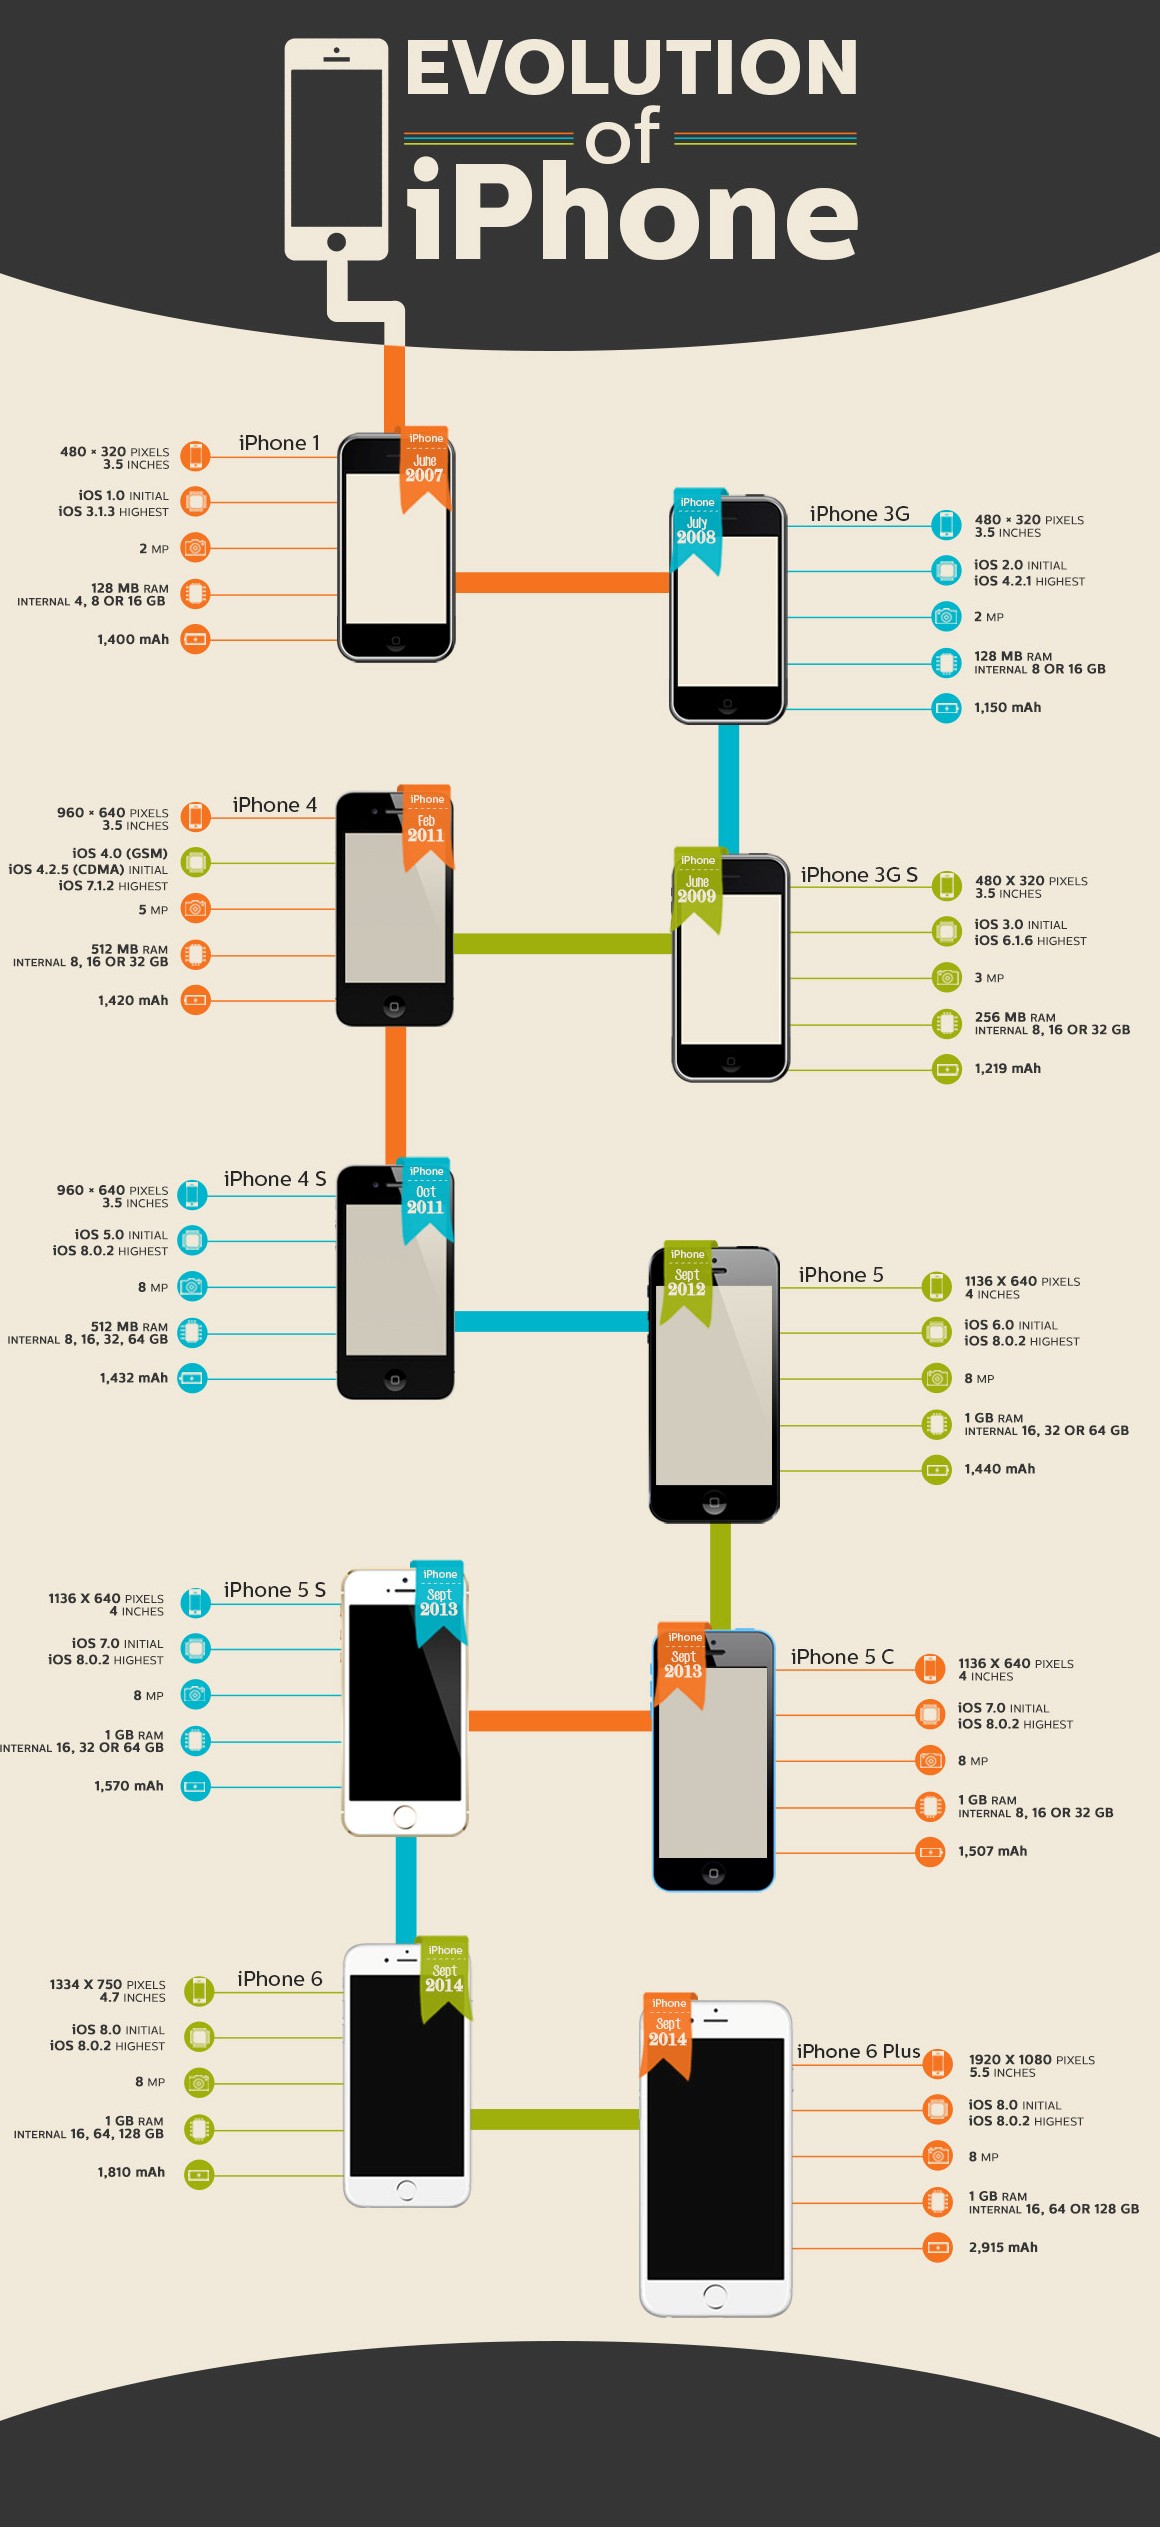 Evolution of iPhone Specs with Release Dates Visual.ly